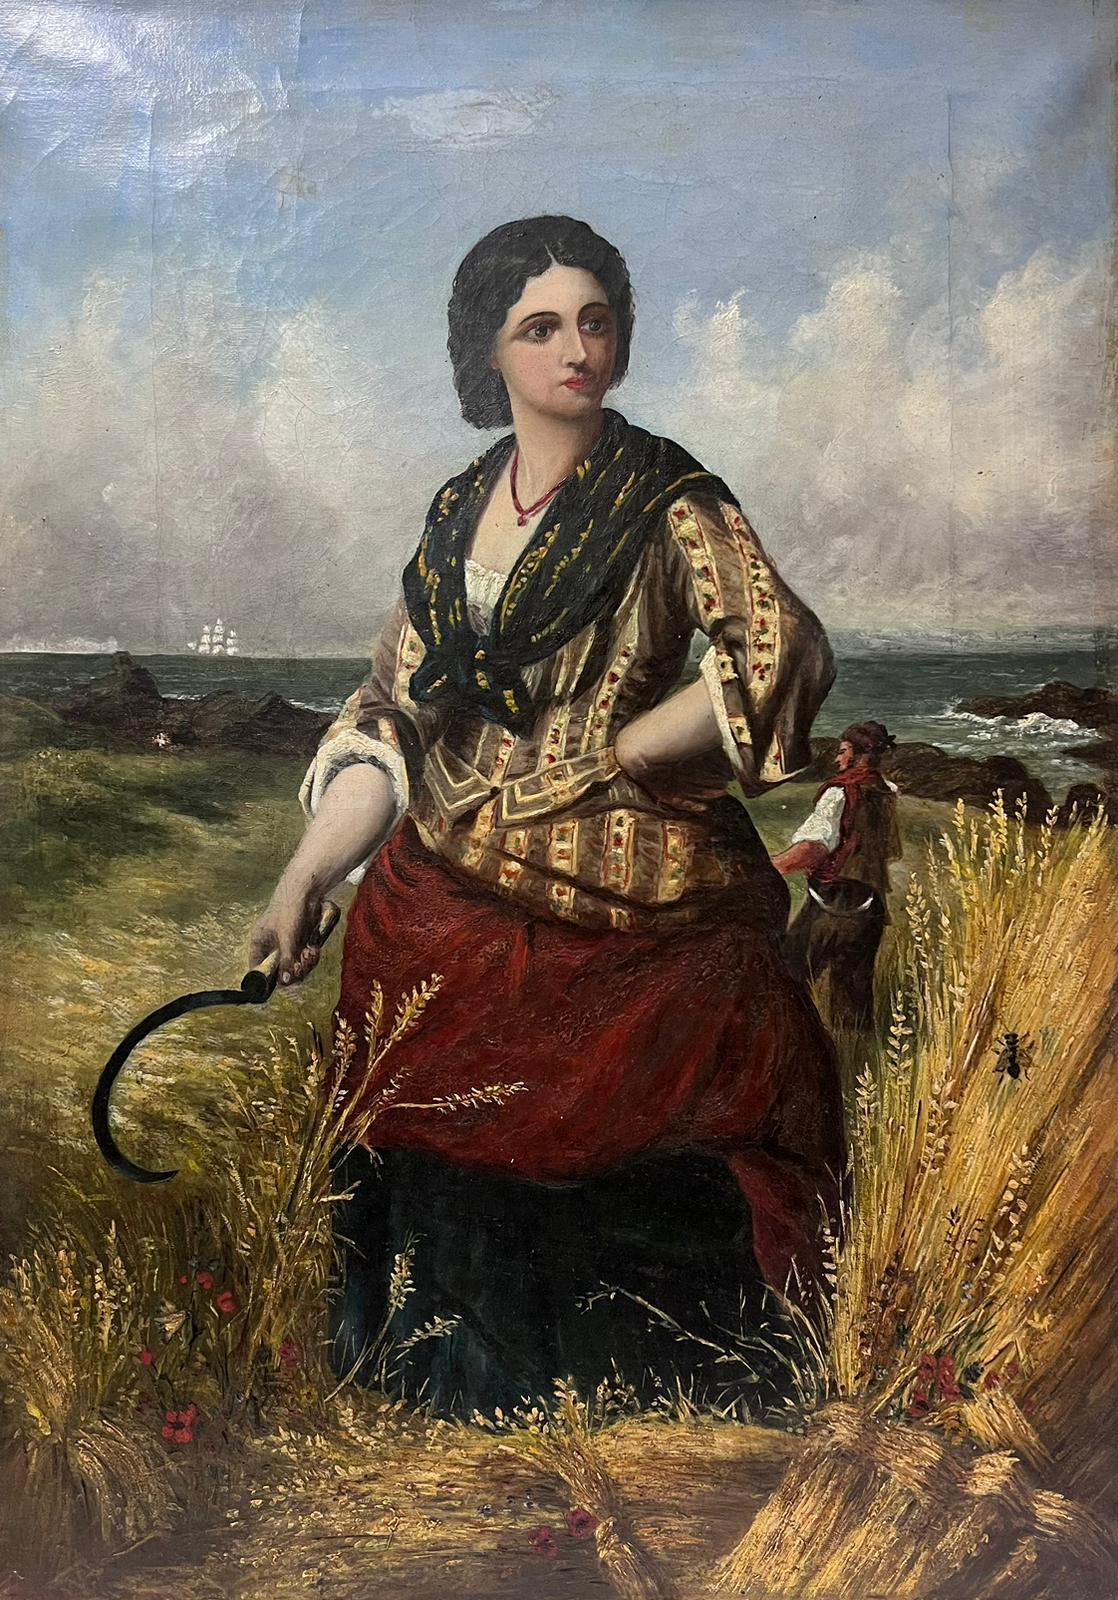 English 19th Century Portrait Painting - Woman in Harvest Fields Next to Coastal Seascape Victorian Oil Painting canvas